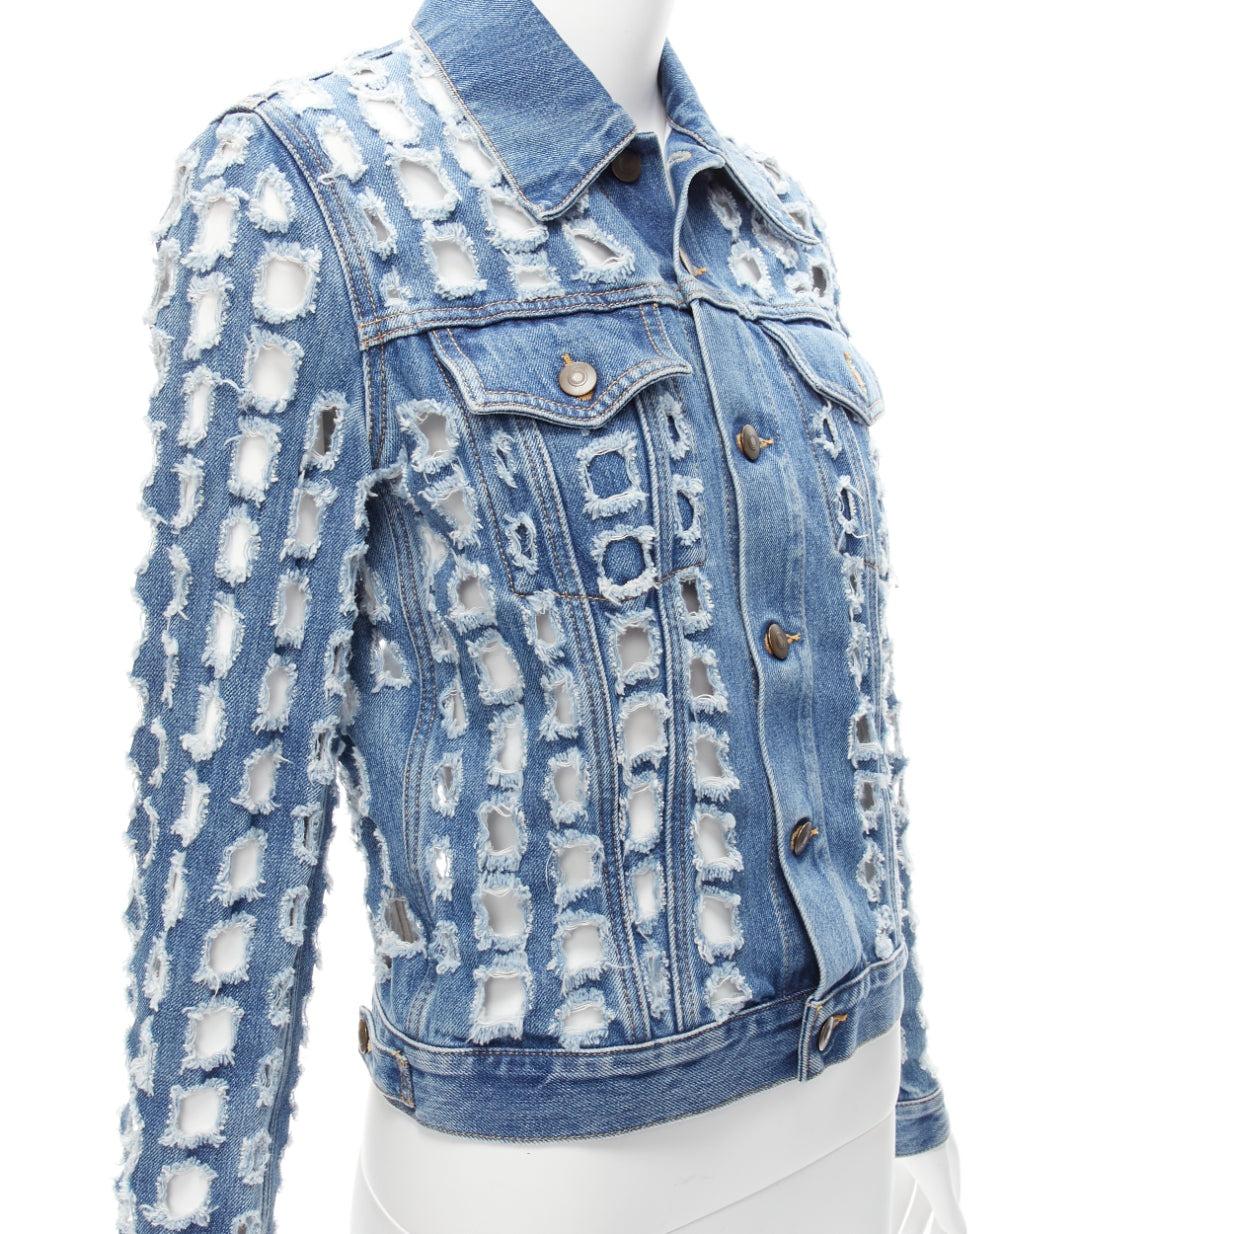 MAISON MARGIELA John Galliano blue Hole Punched distressed denim jacket
Reference: NKLL/A00013
Brand: Maison Margiela
Designer: John Galliano
Material: Denim
Color: Blue
Pattern: Solid
Closure: Button
Made in: Italy

CONDITION:
Condition: Excellent,